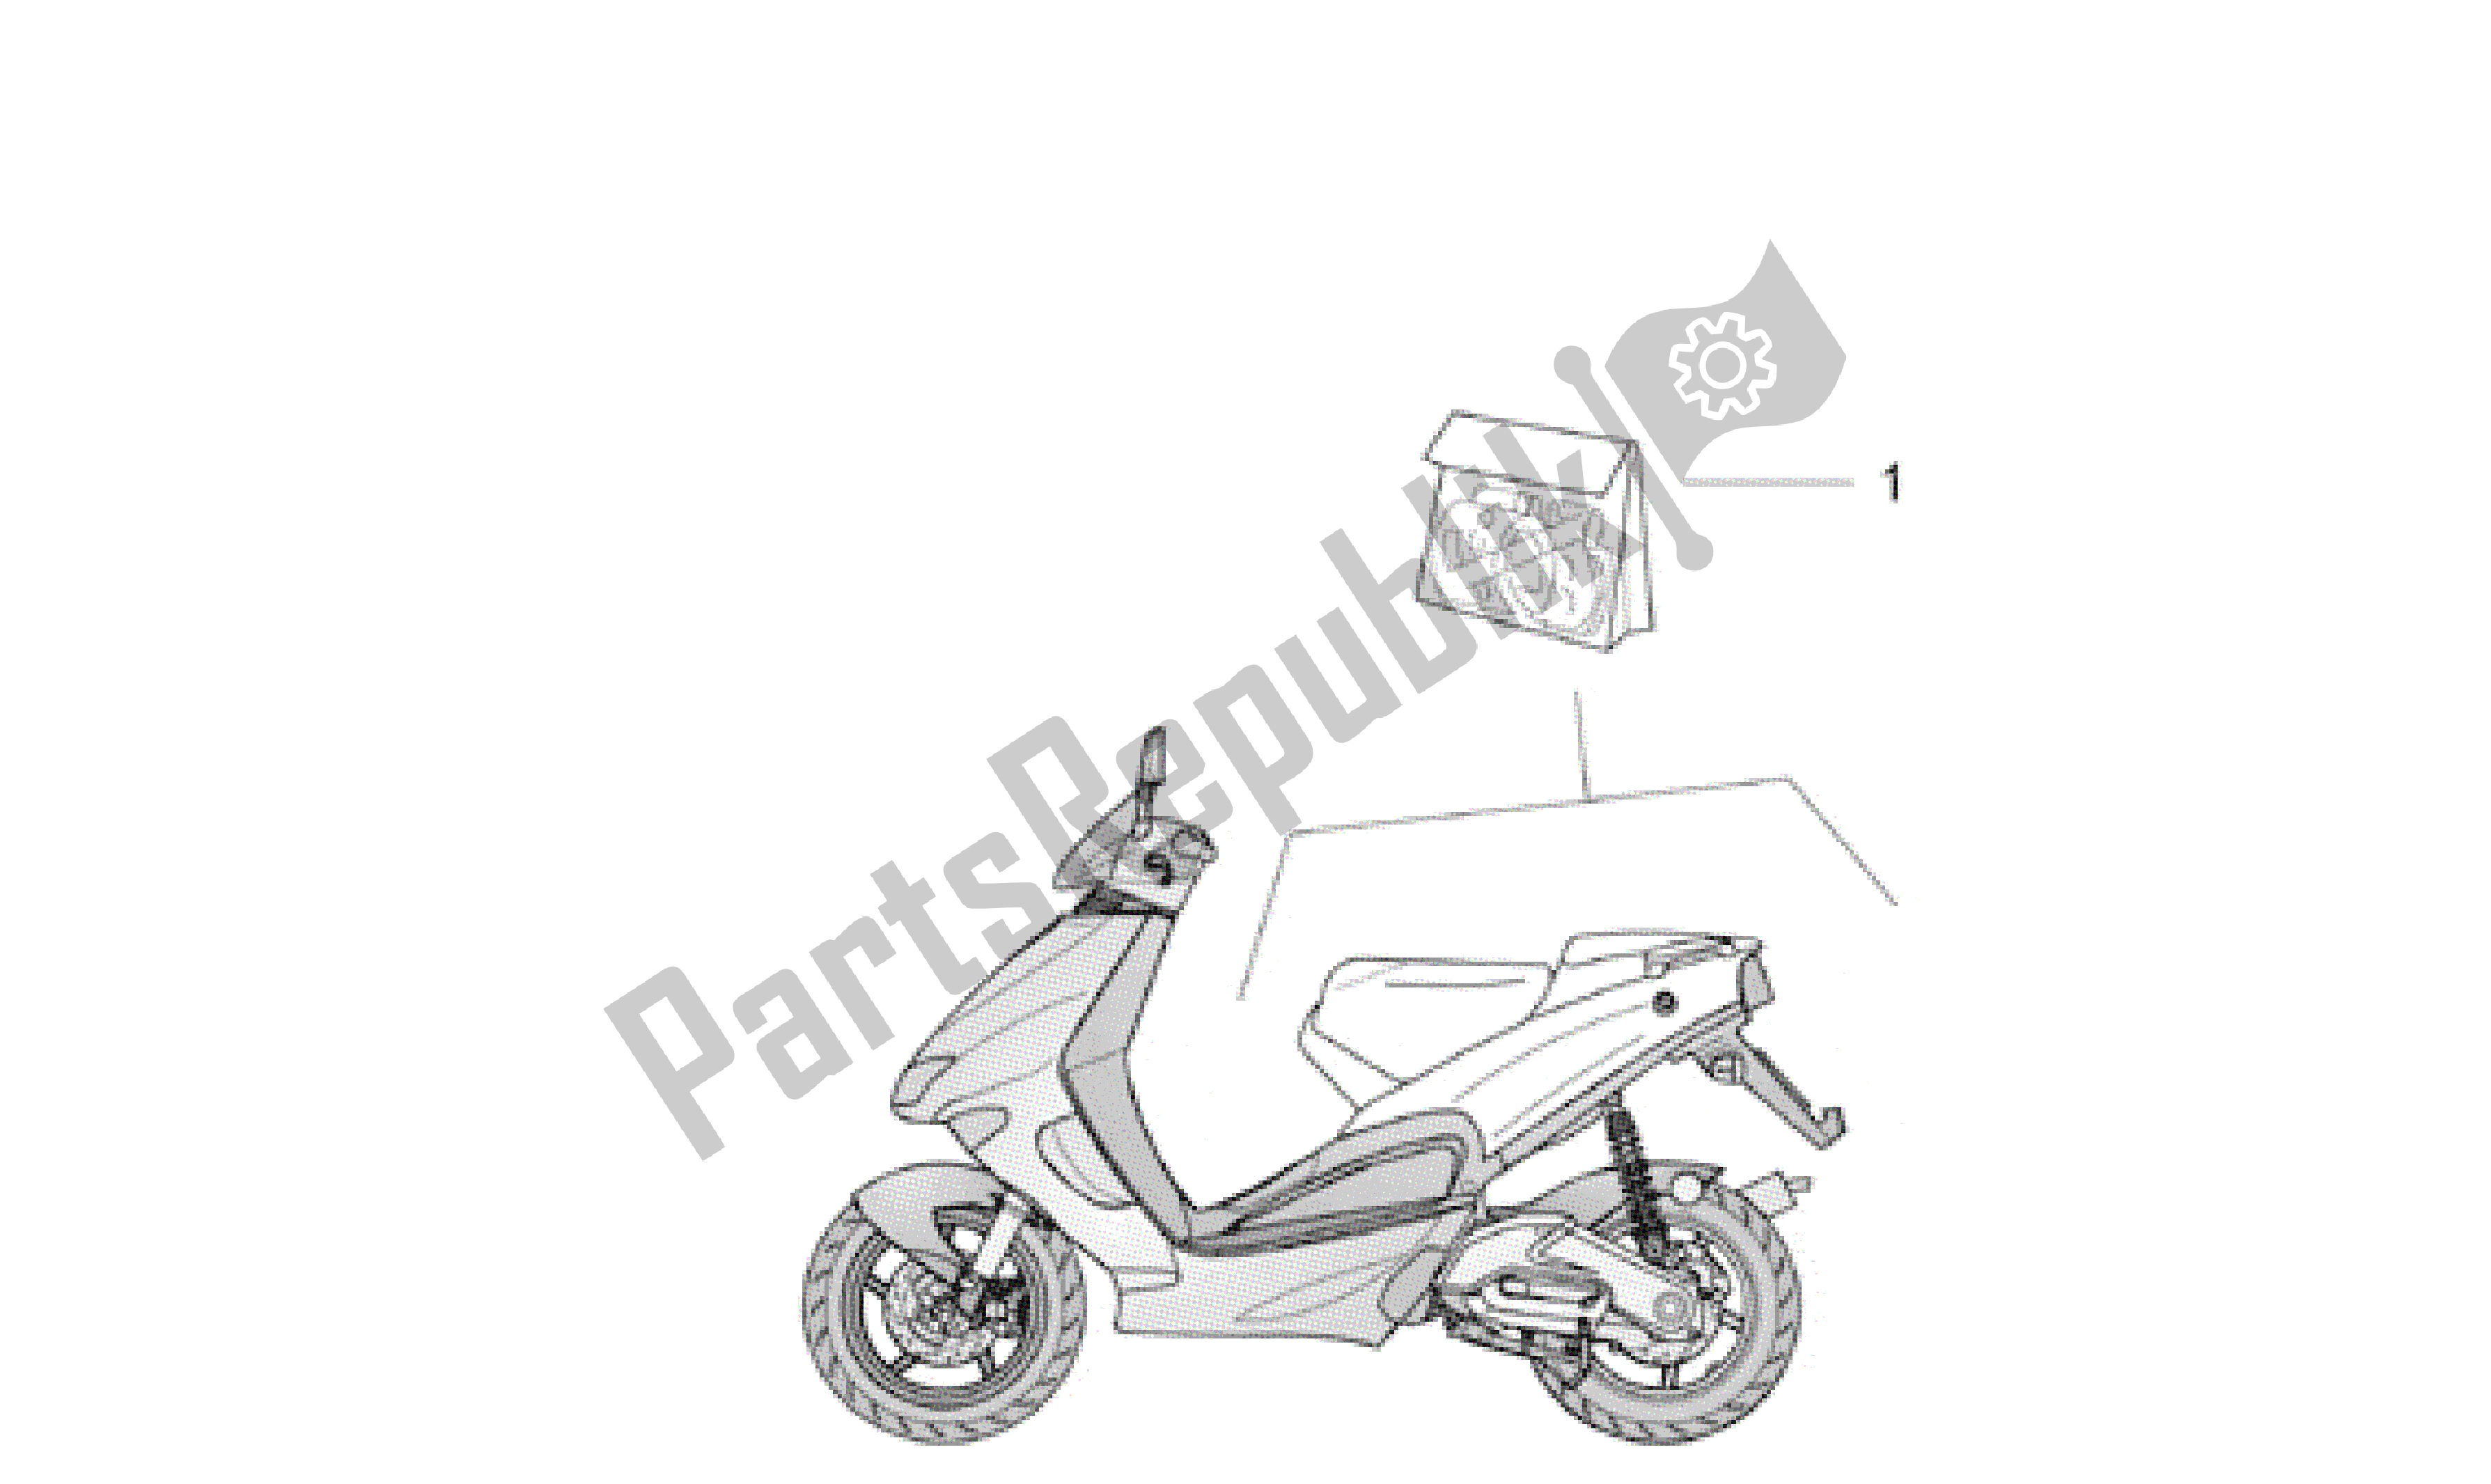 All parts for the Rear Body Decal Set of the Aprilia SR WWW 50 1997 - 2001